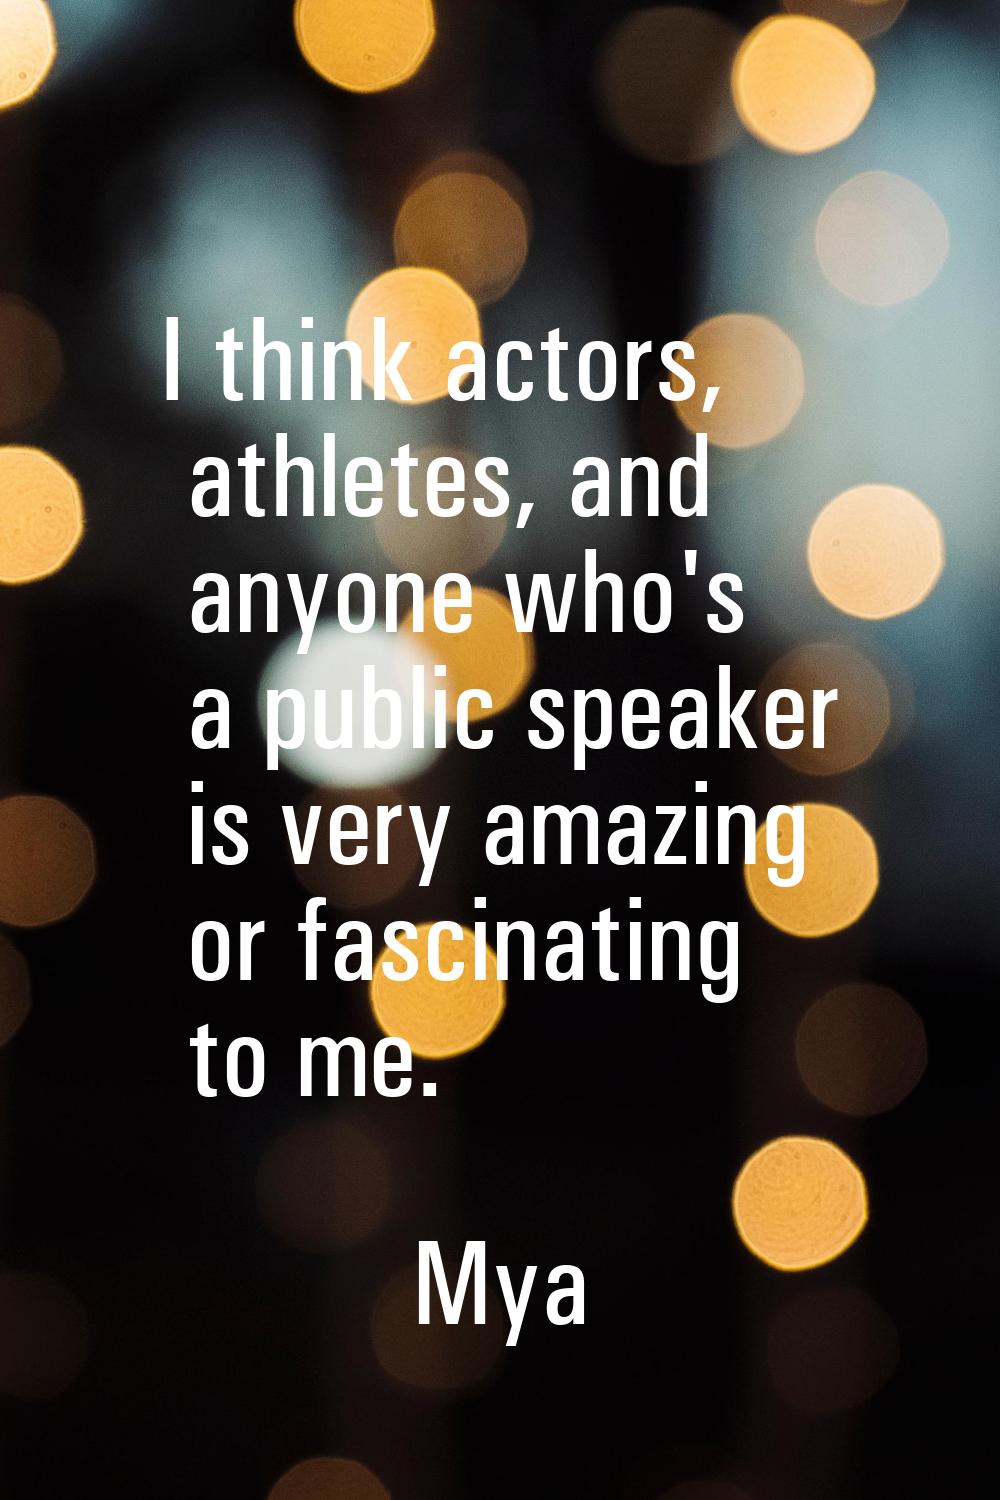 I think actors, athletes, and anyone who's a public speaker is very amazing or fascinating to me.